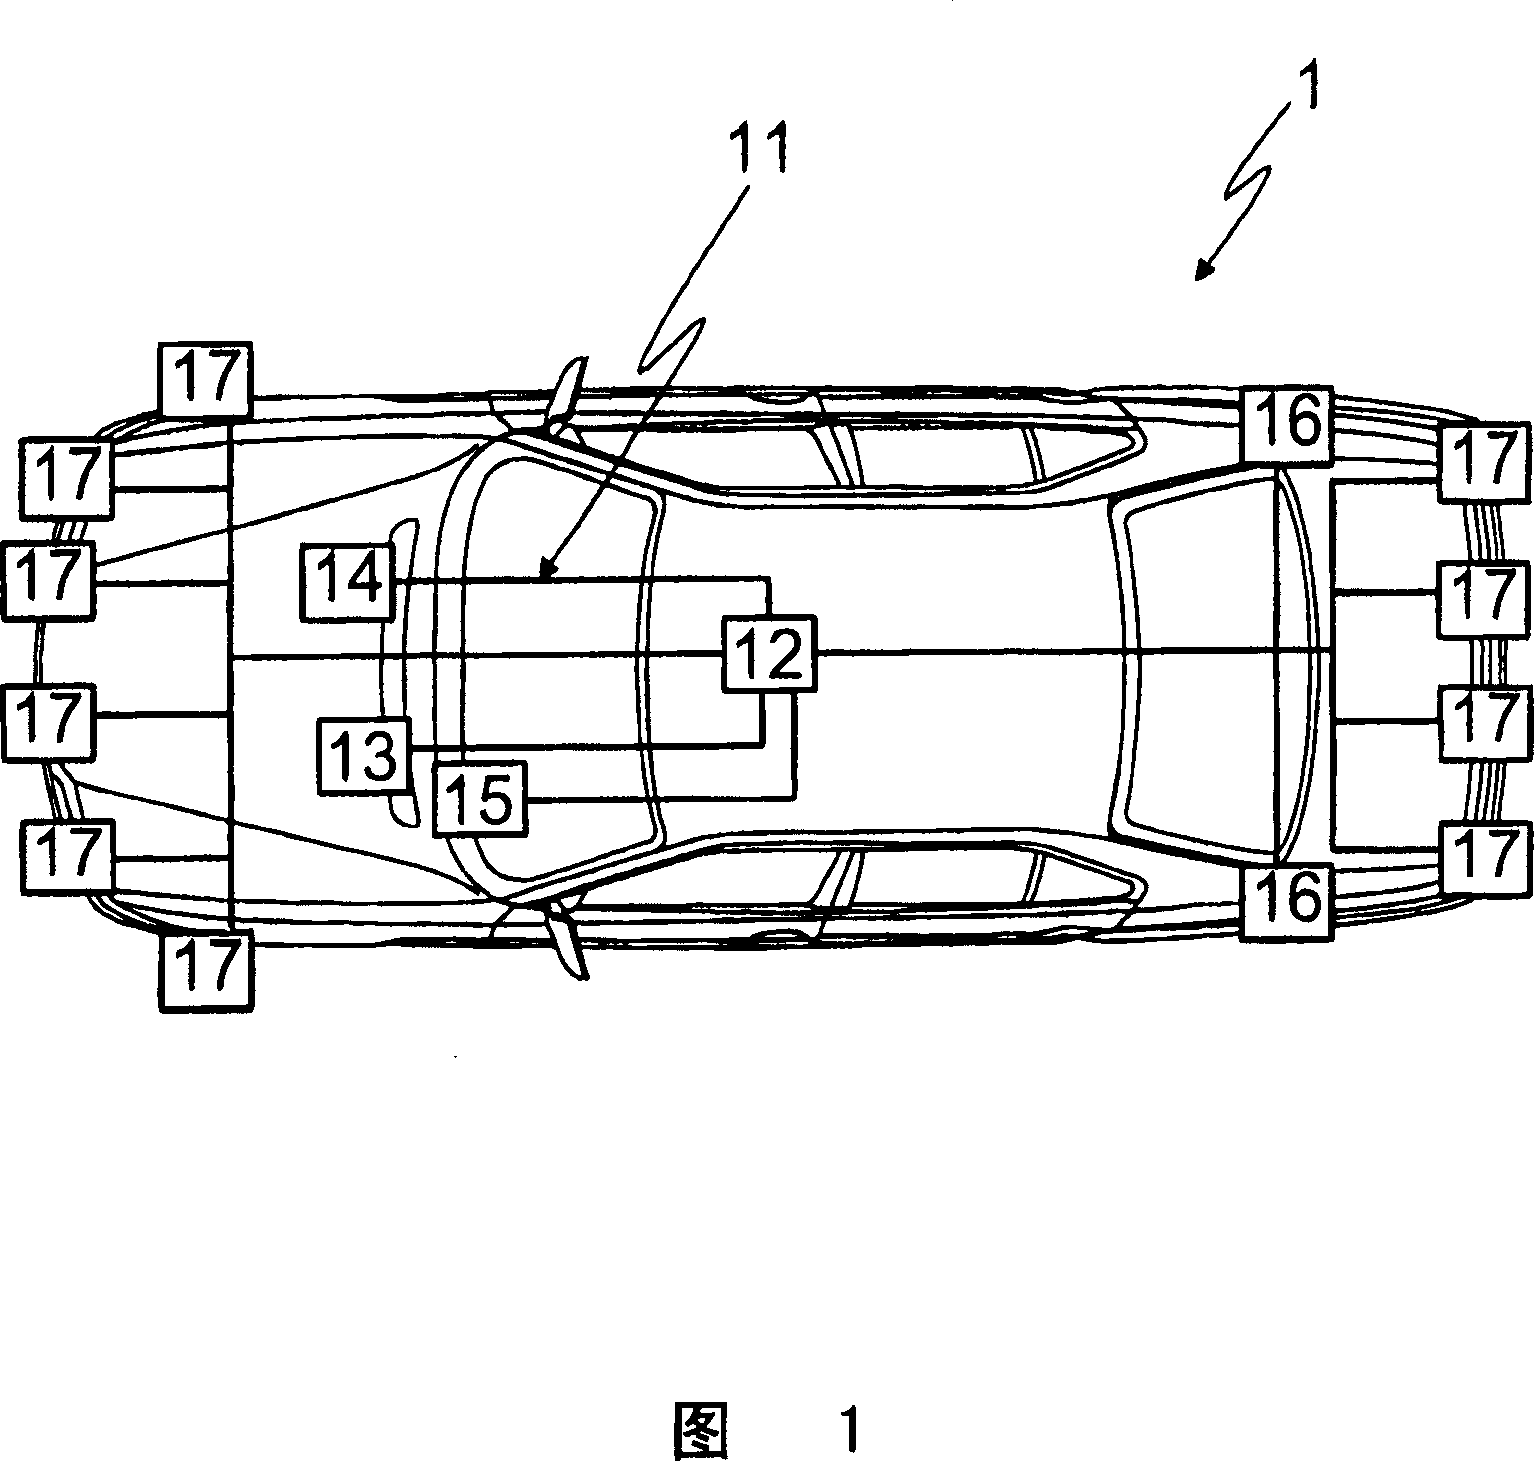 Method and device for assisting the parking of a motor vehicle